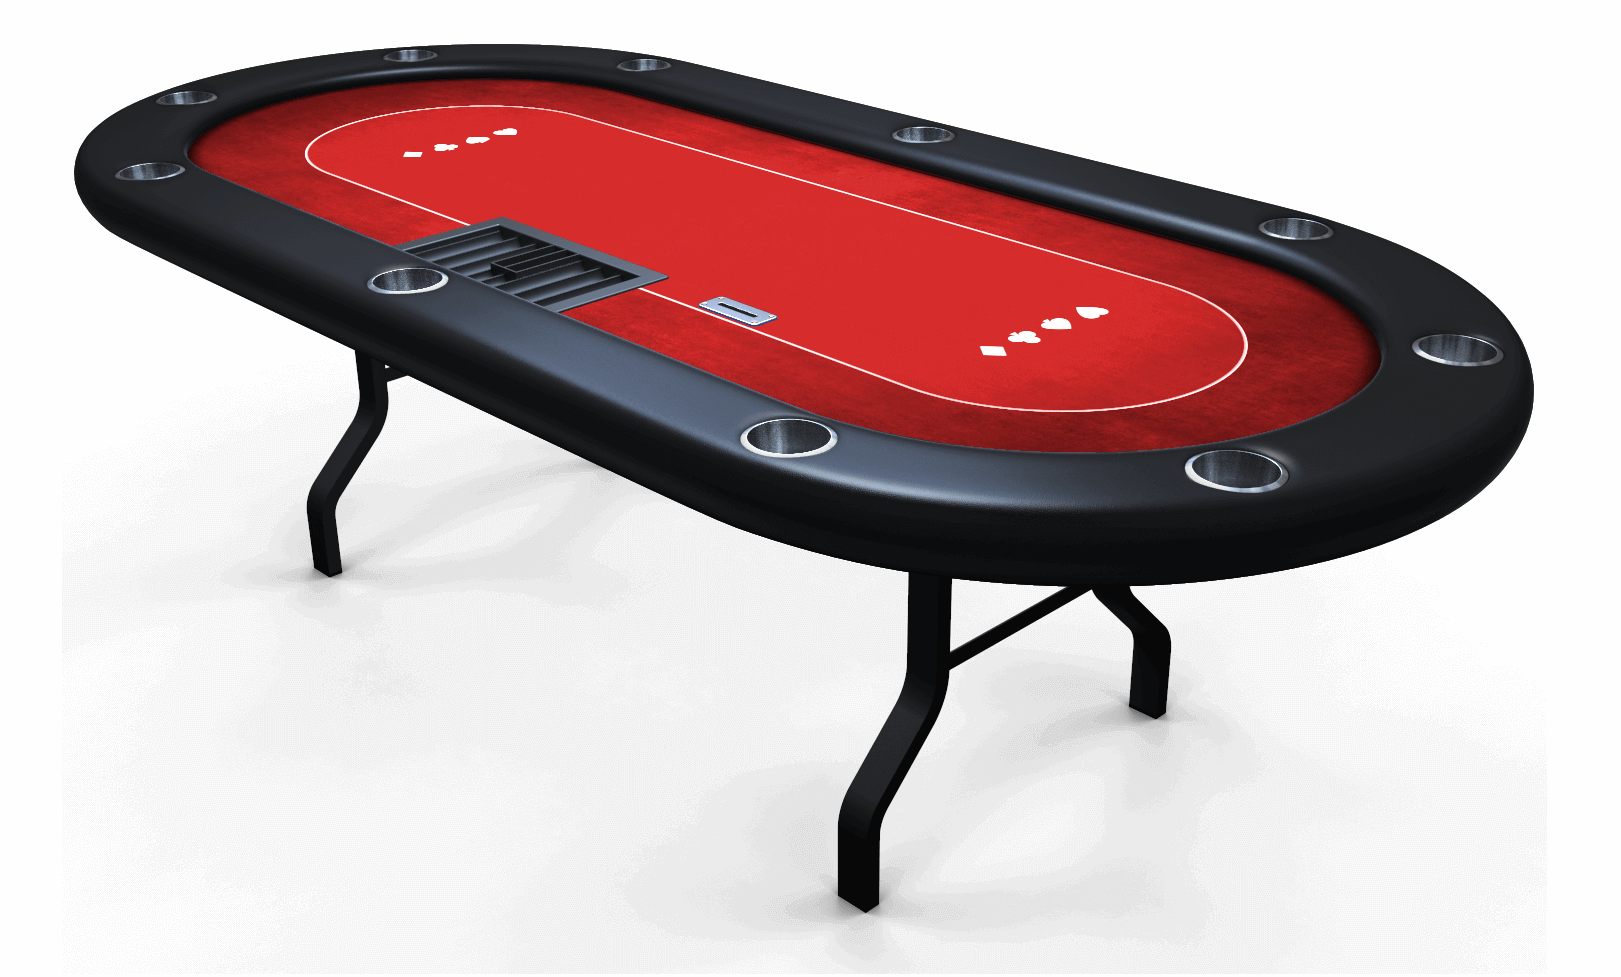 Oval-shaped custom-made poker table with black vinyl rail, built-in cupholders, and a red felt playing surface.